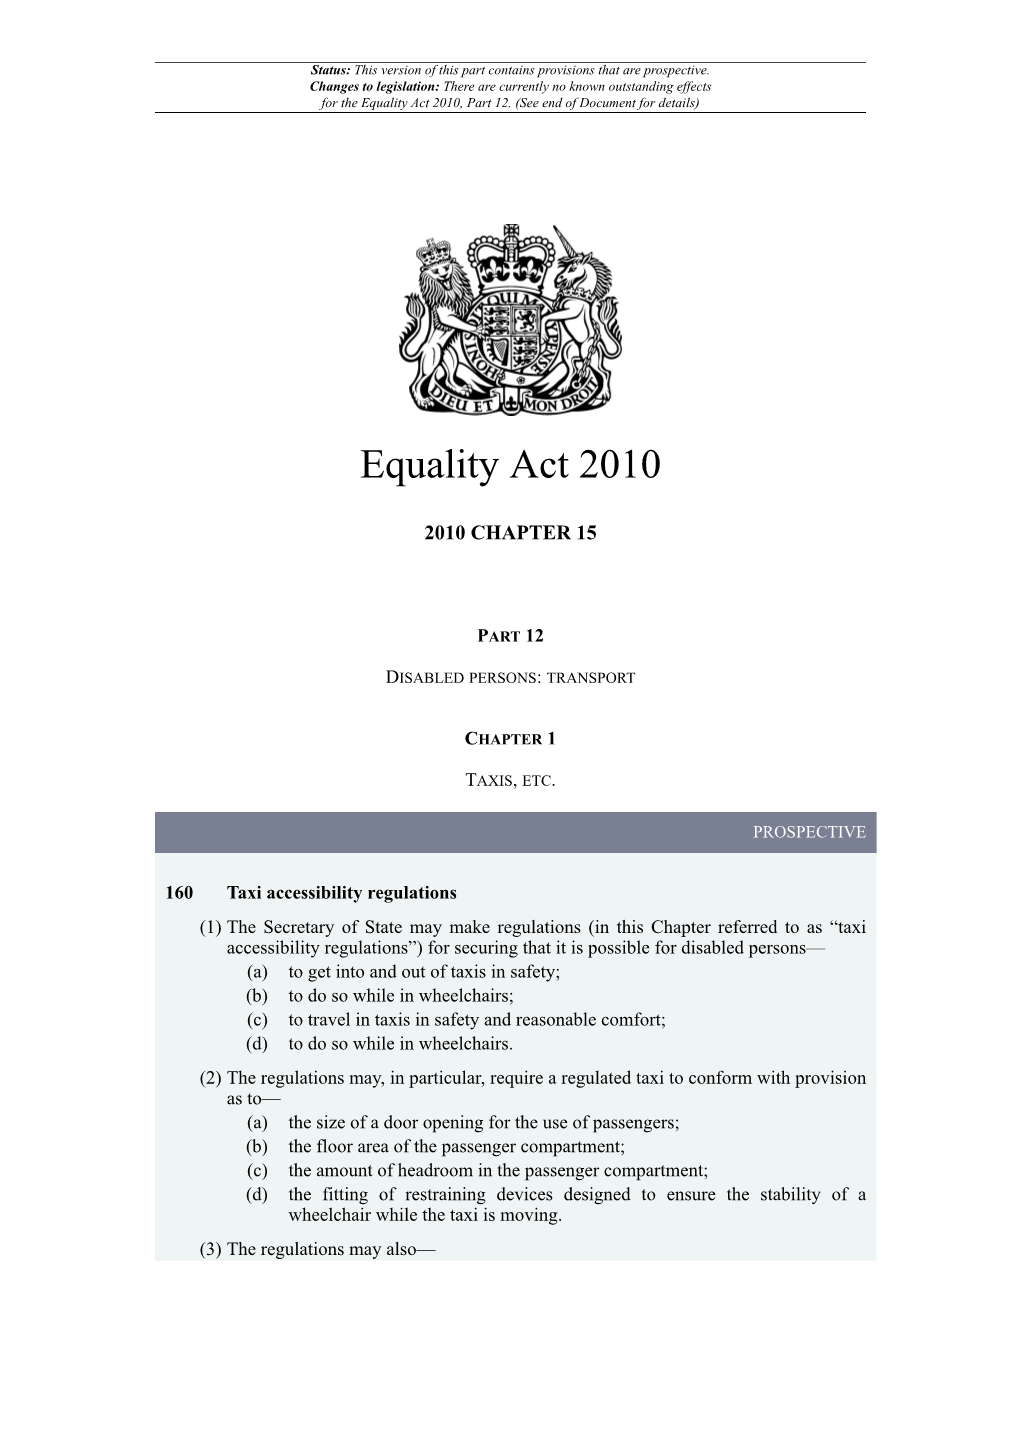 Equality Act 2010, Part 12